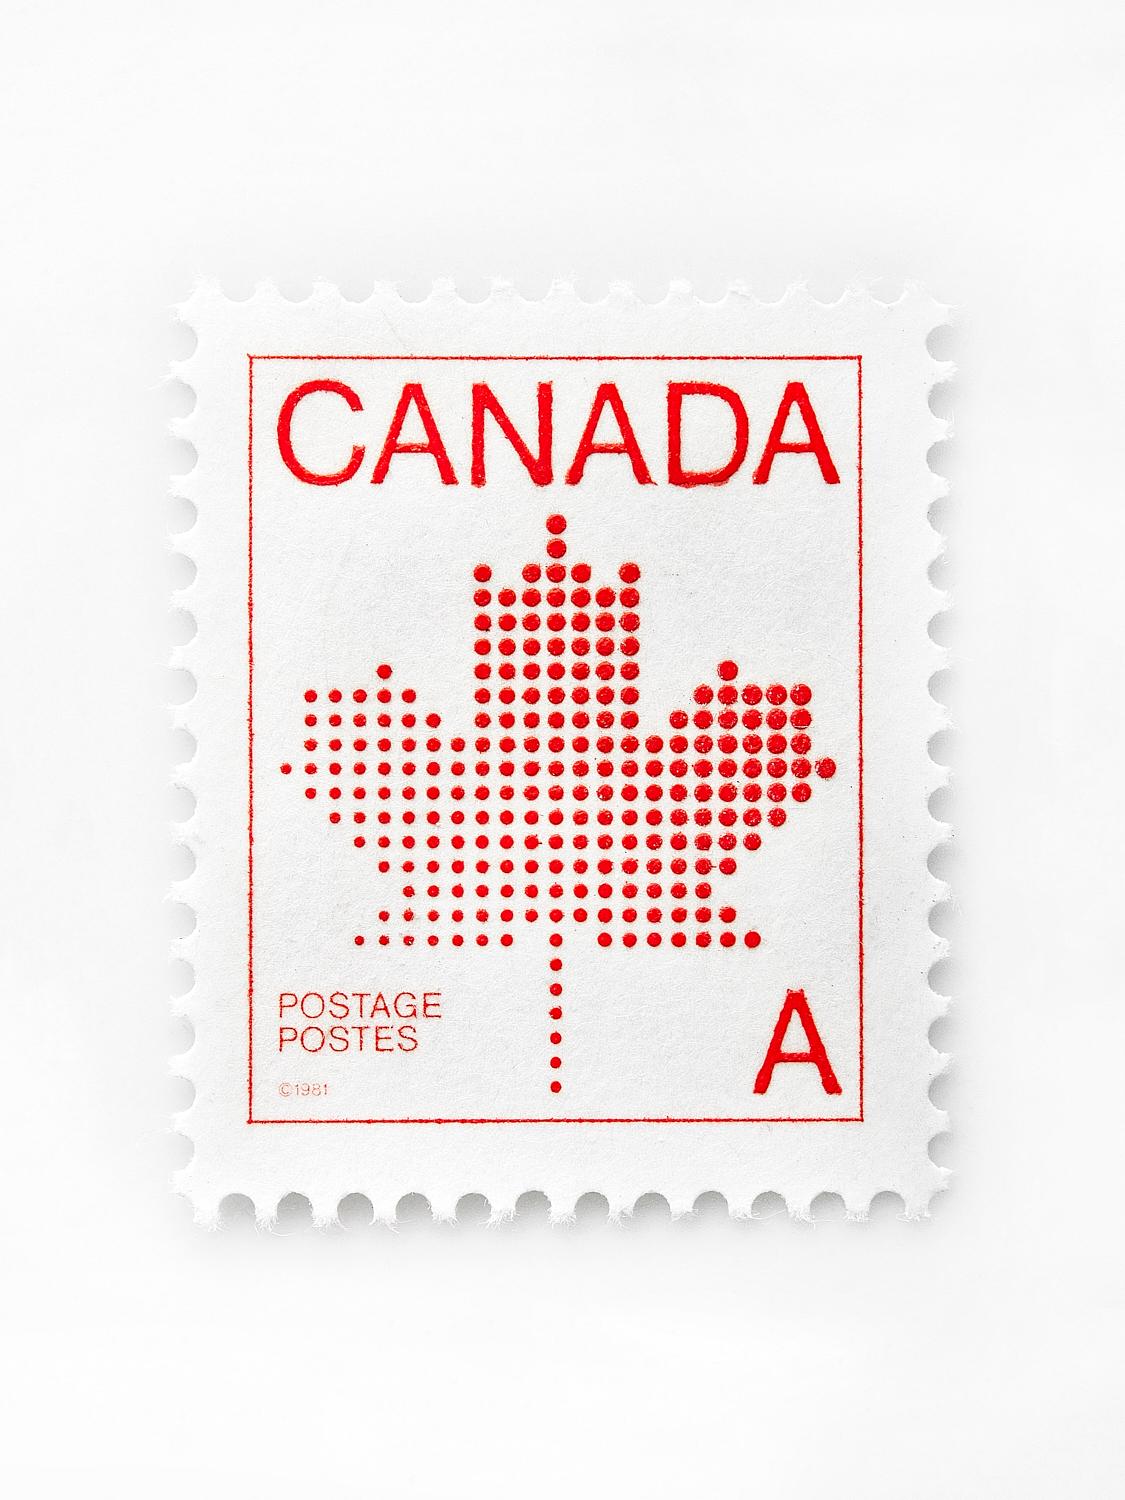 Peter Andrew Lusztyk - Canada "A" Stamp, Photography 2021, Printed After